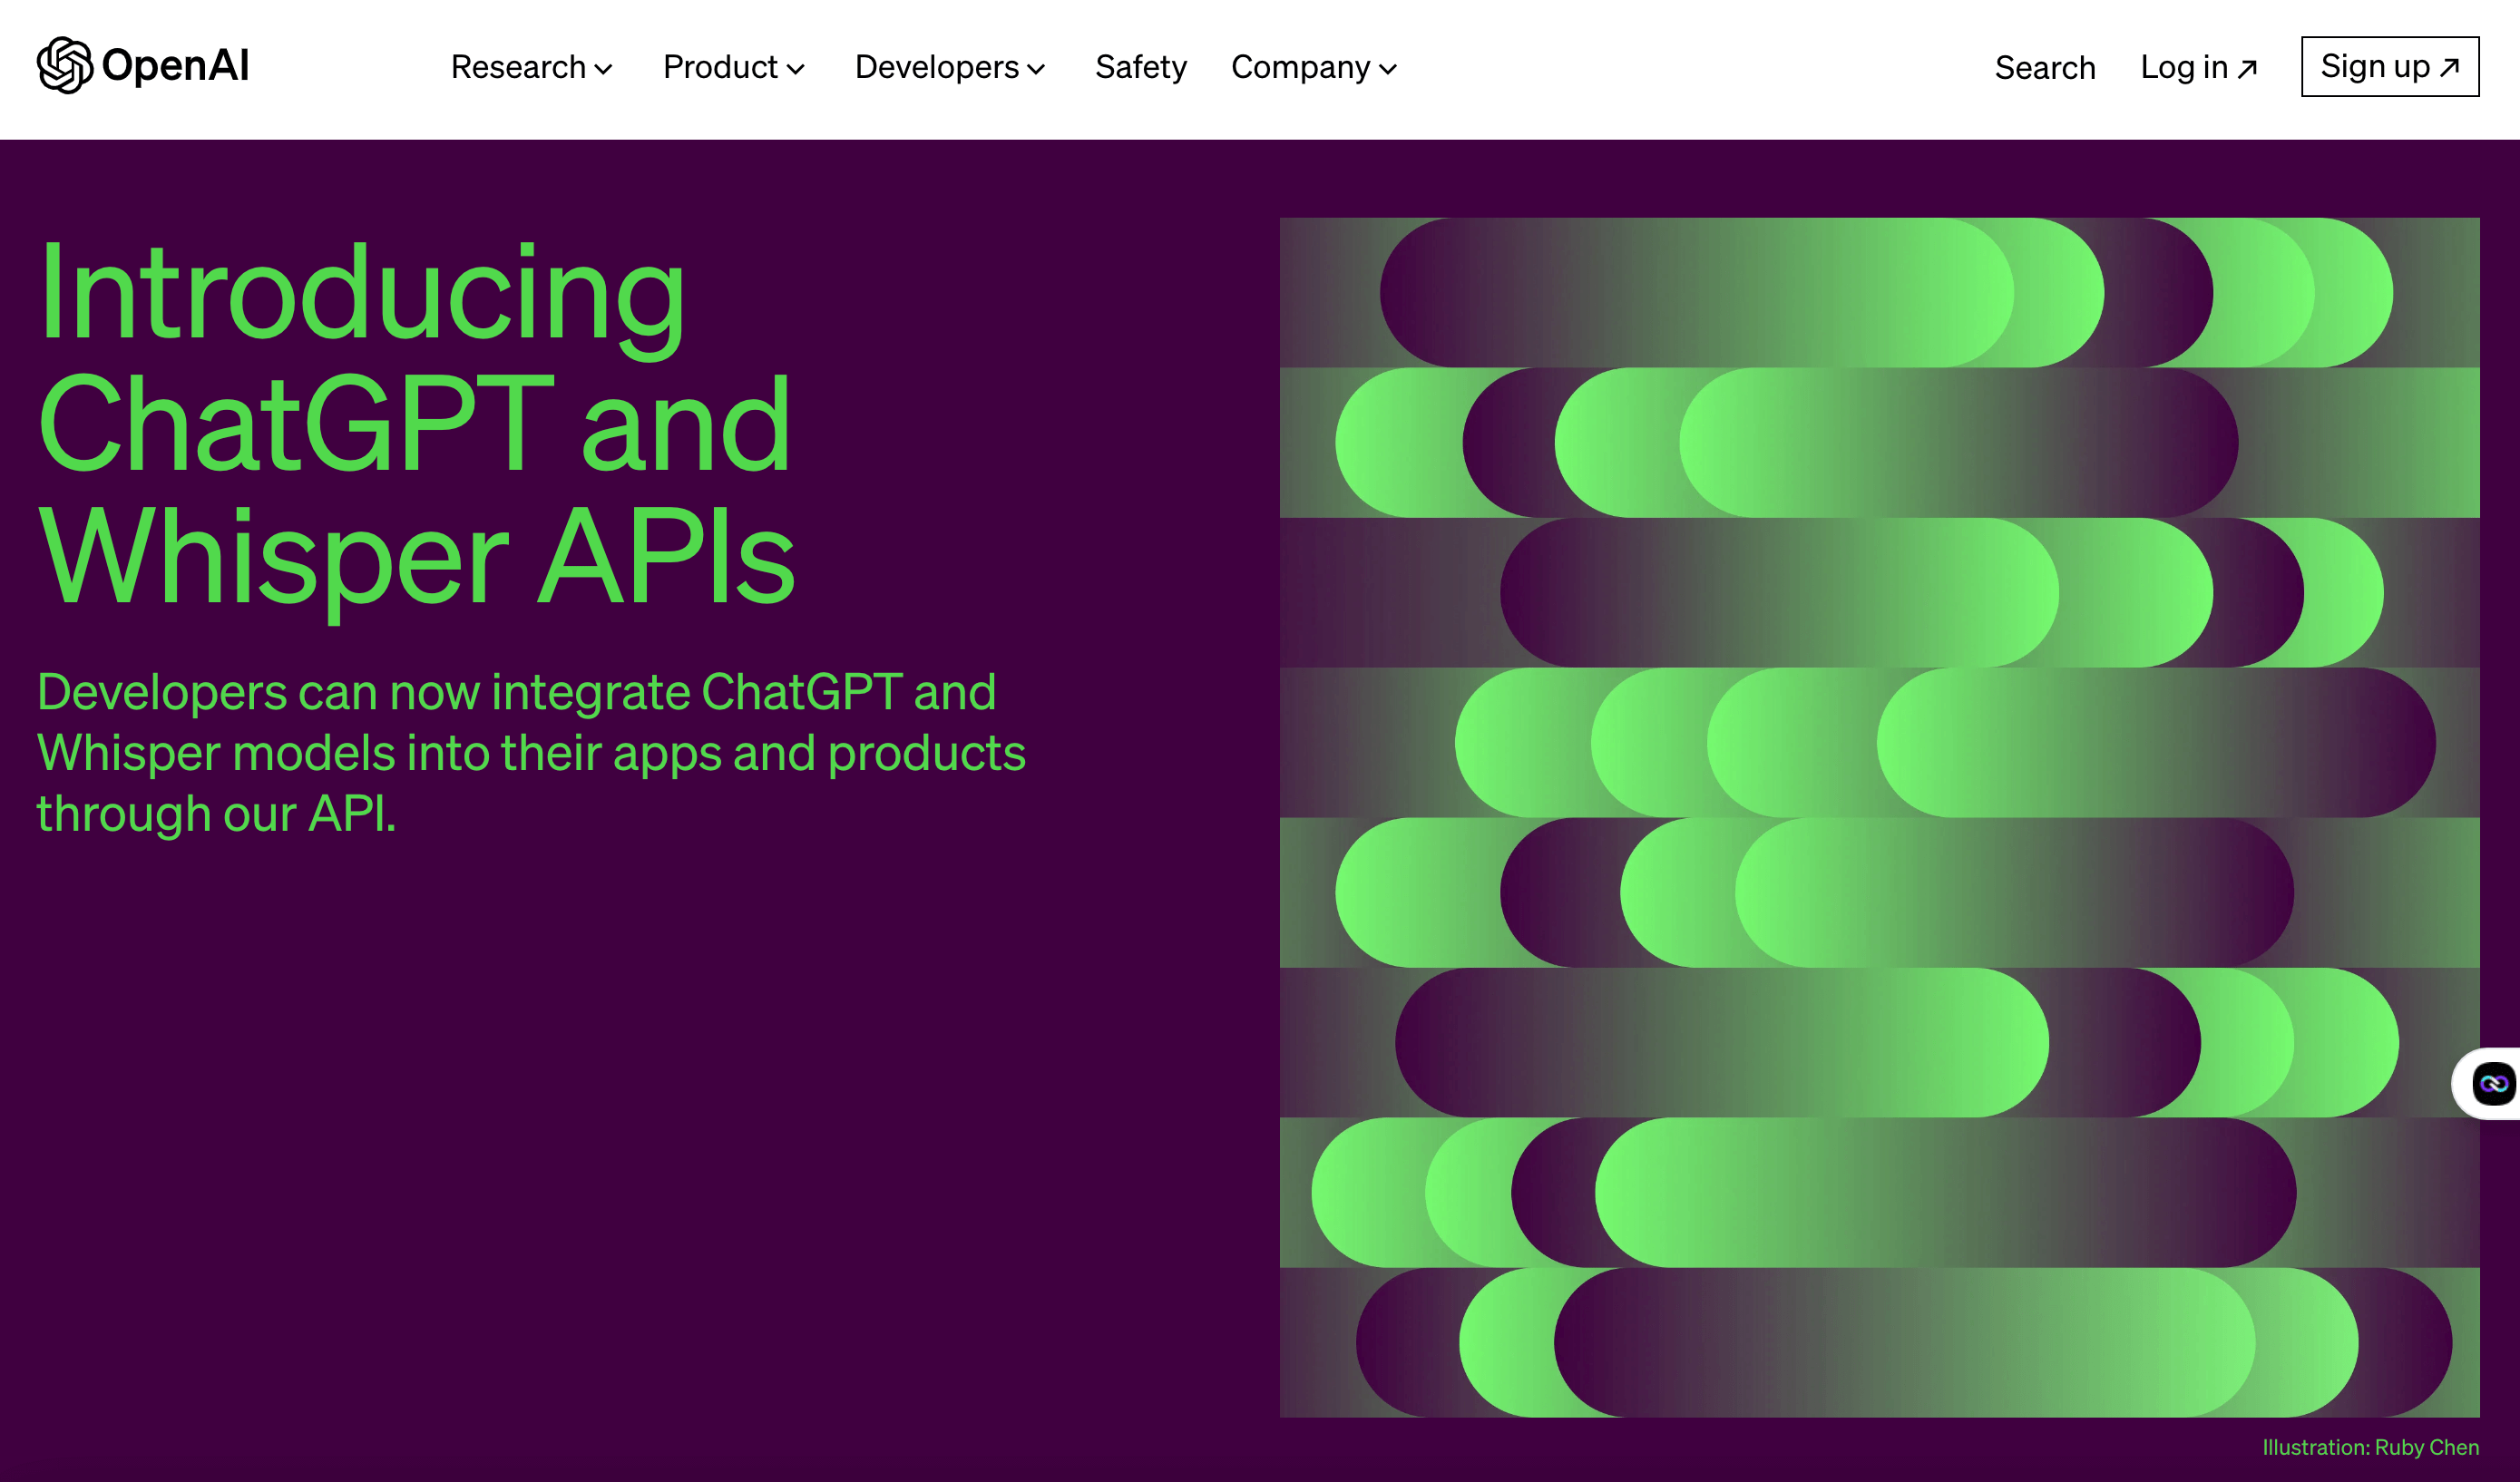 Open AI Introducing ChatGPT and Whisper Apis